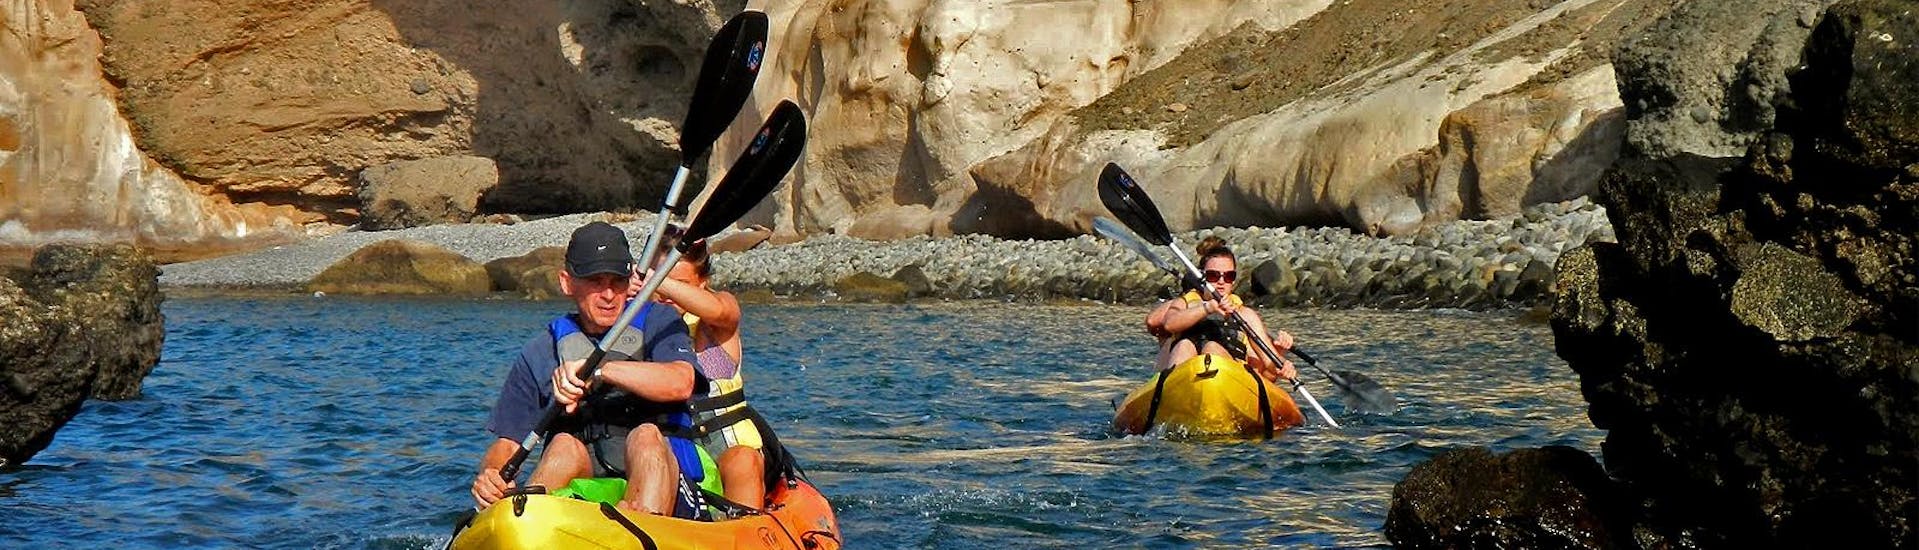 During the Sea Kayak Tour at the South Coast in Gran Canaria the participants paddle in the beautiful sea and admire the rock formations together with Mojo Picón Aventura.